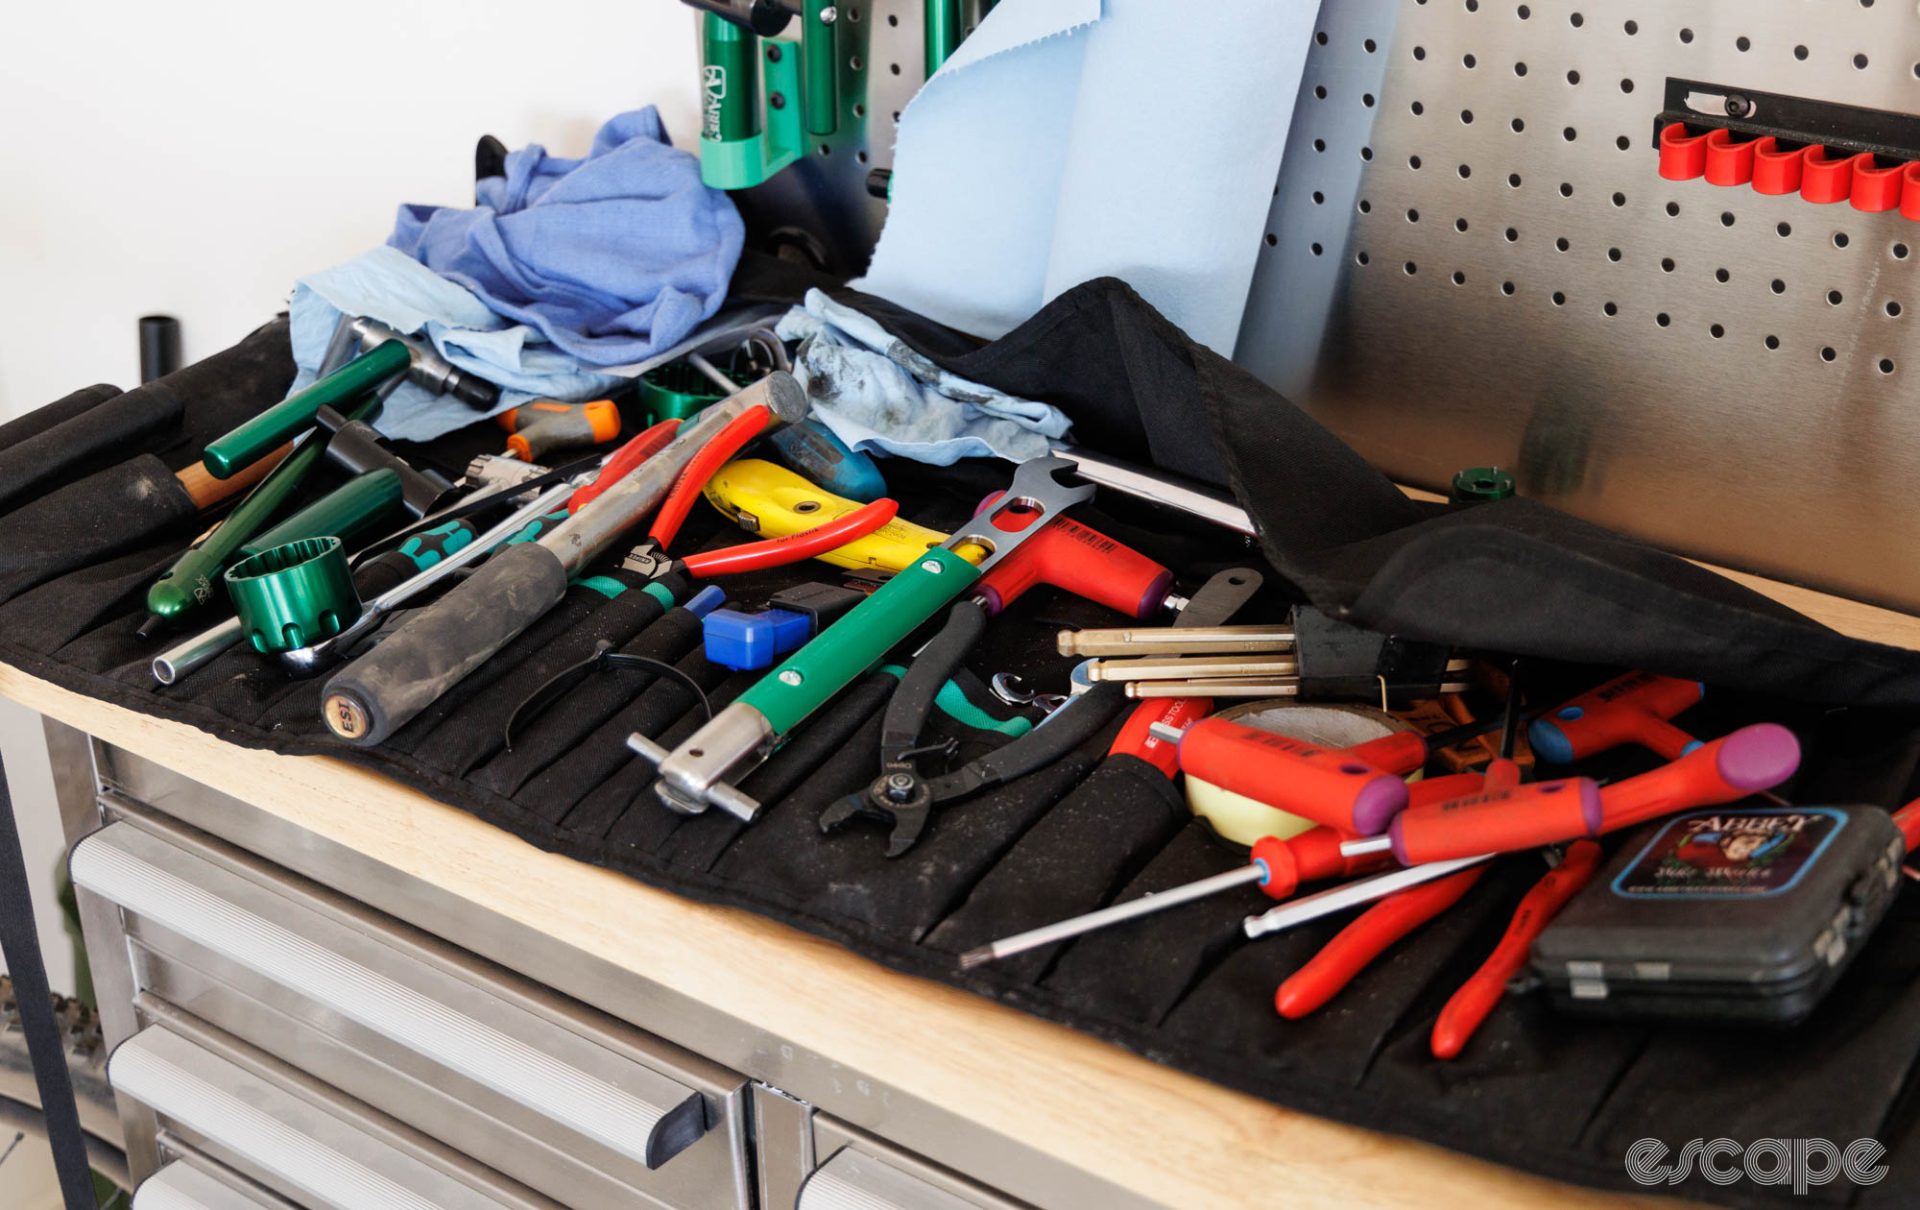 Quade's tool roll is shown on a bench. It's a cluttered mess with all manner of tools piled on the wrap.